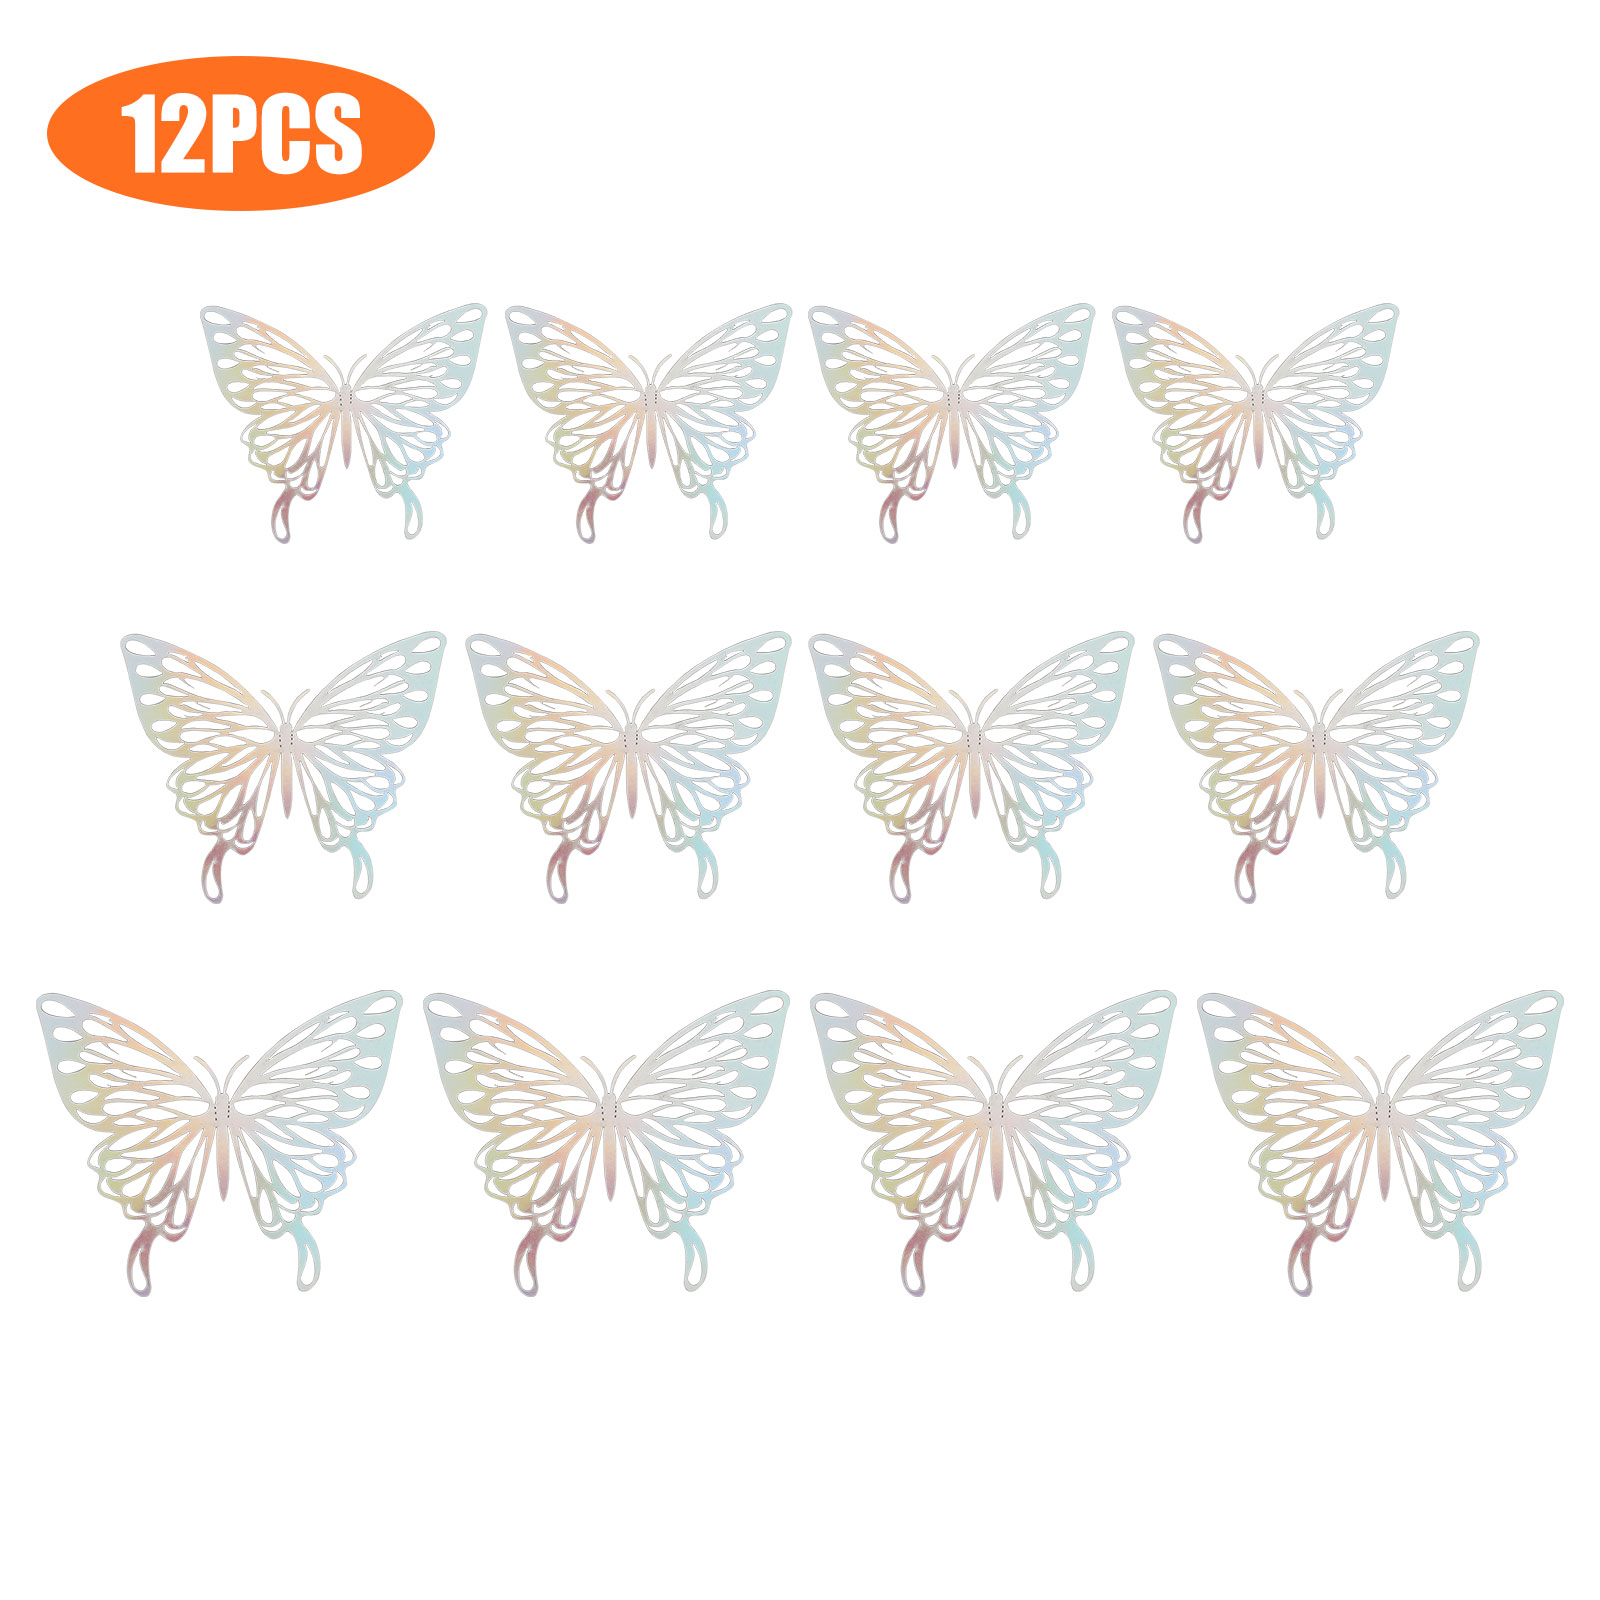 Removable 12Pcs 3D Butterfly Art Room Decor Wall Stickers Kids Room Decals 